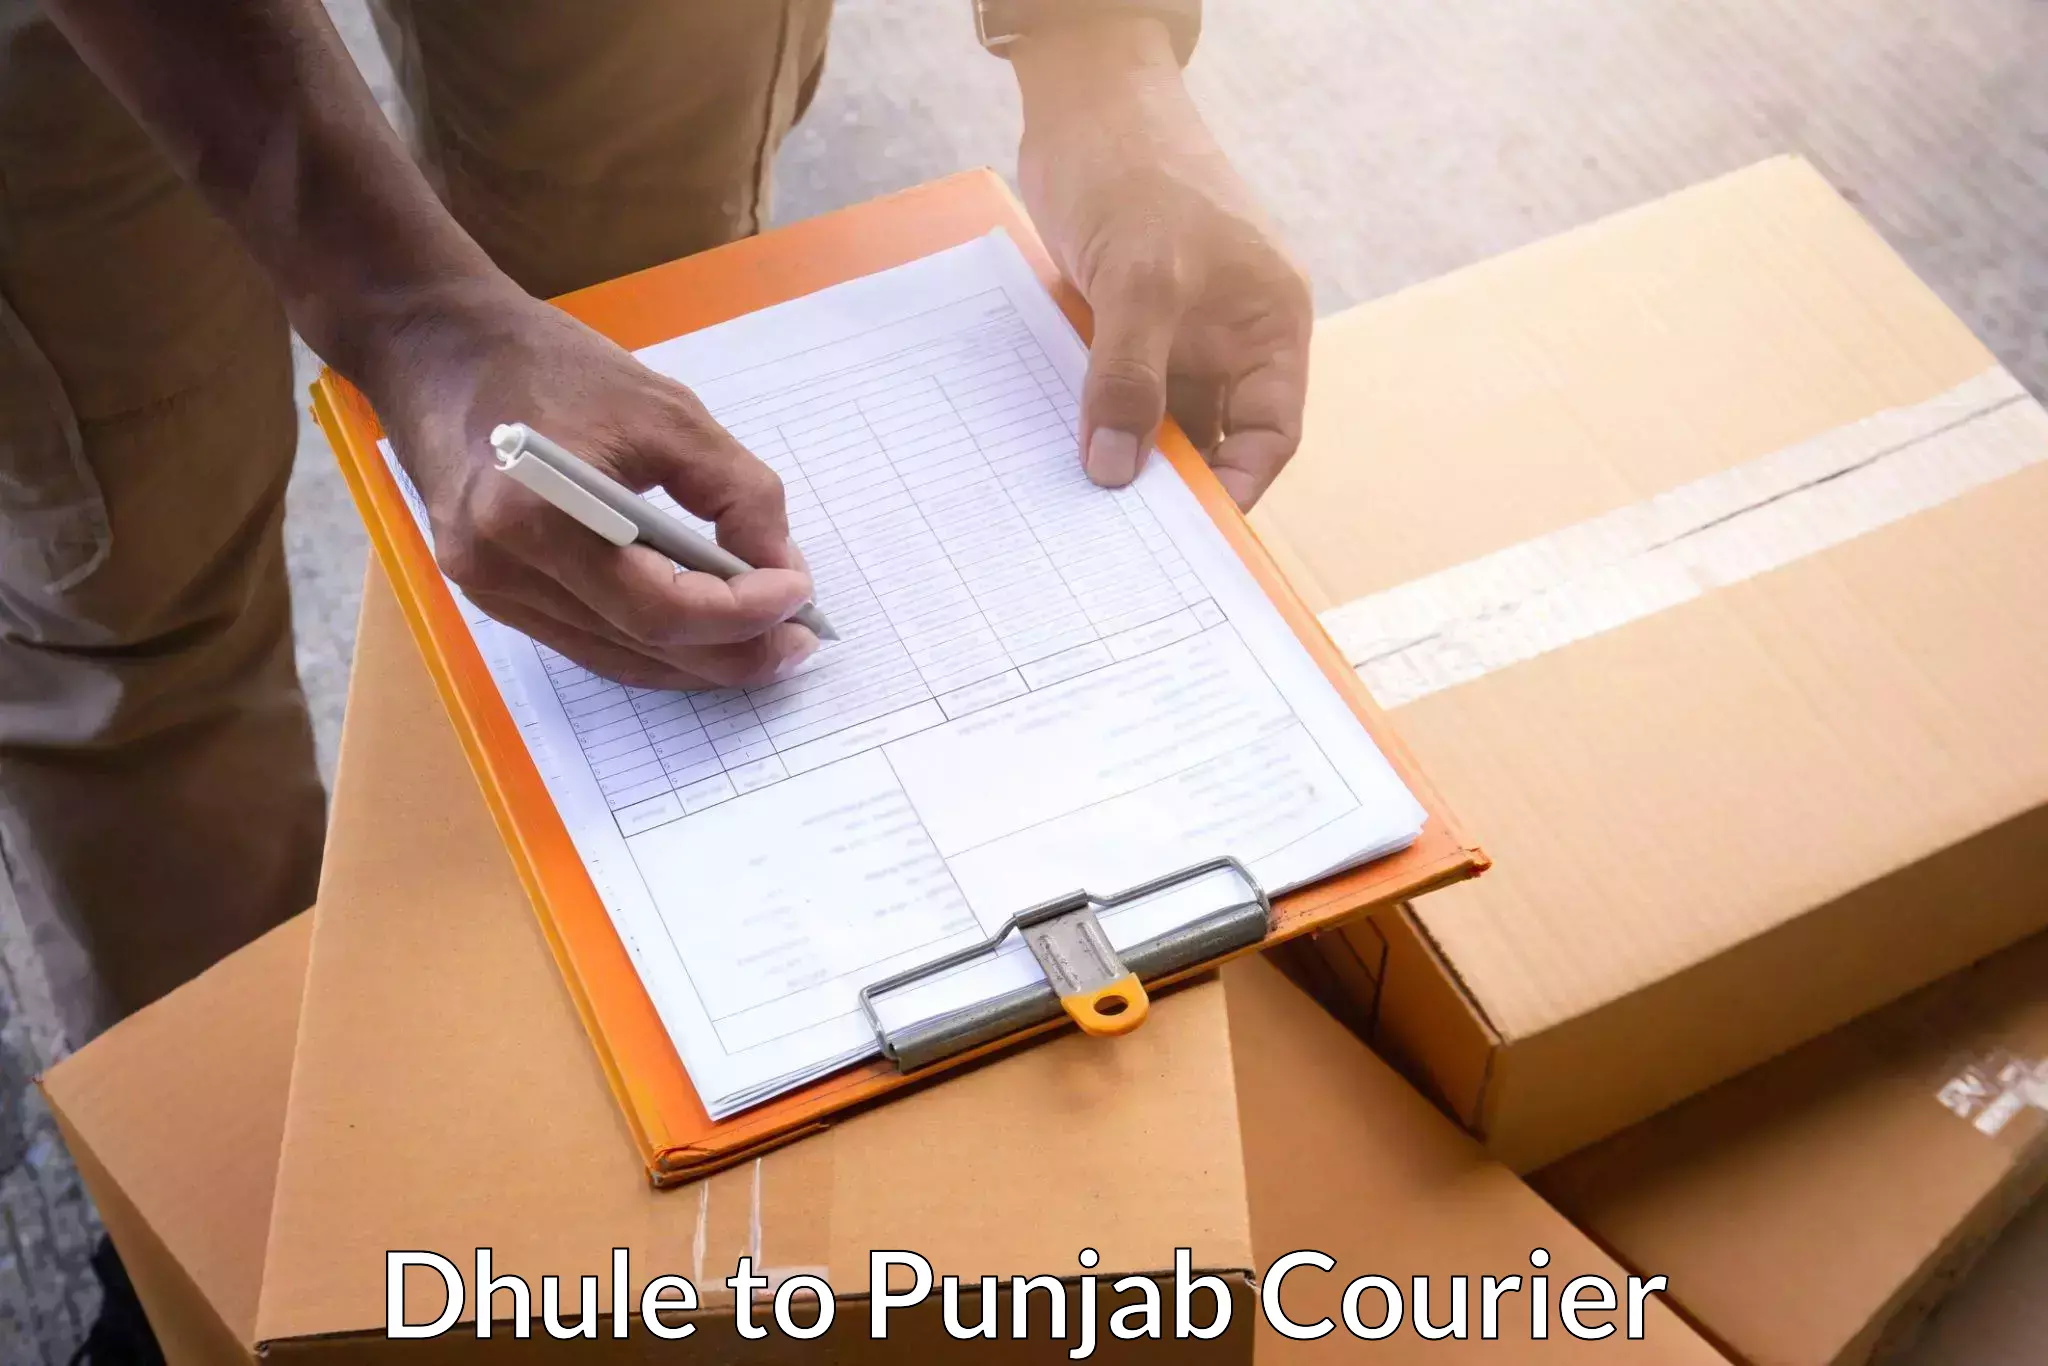 Specialized shipment handling Dhule to Ludhiana